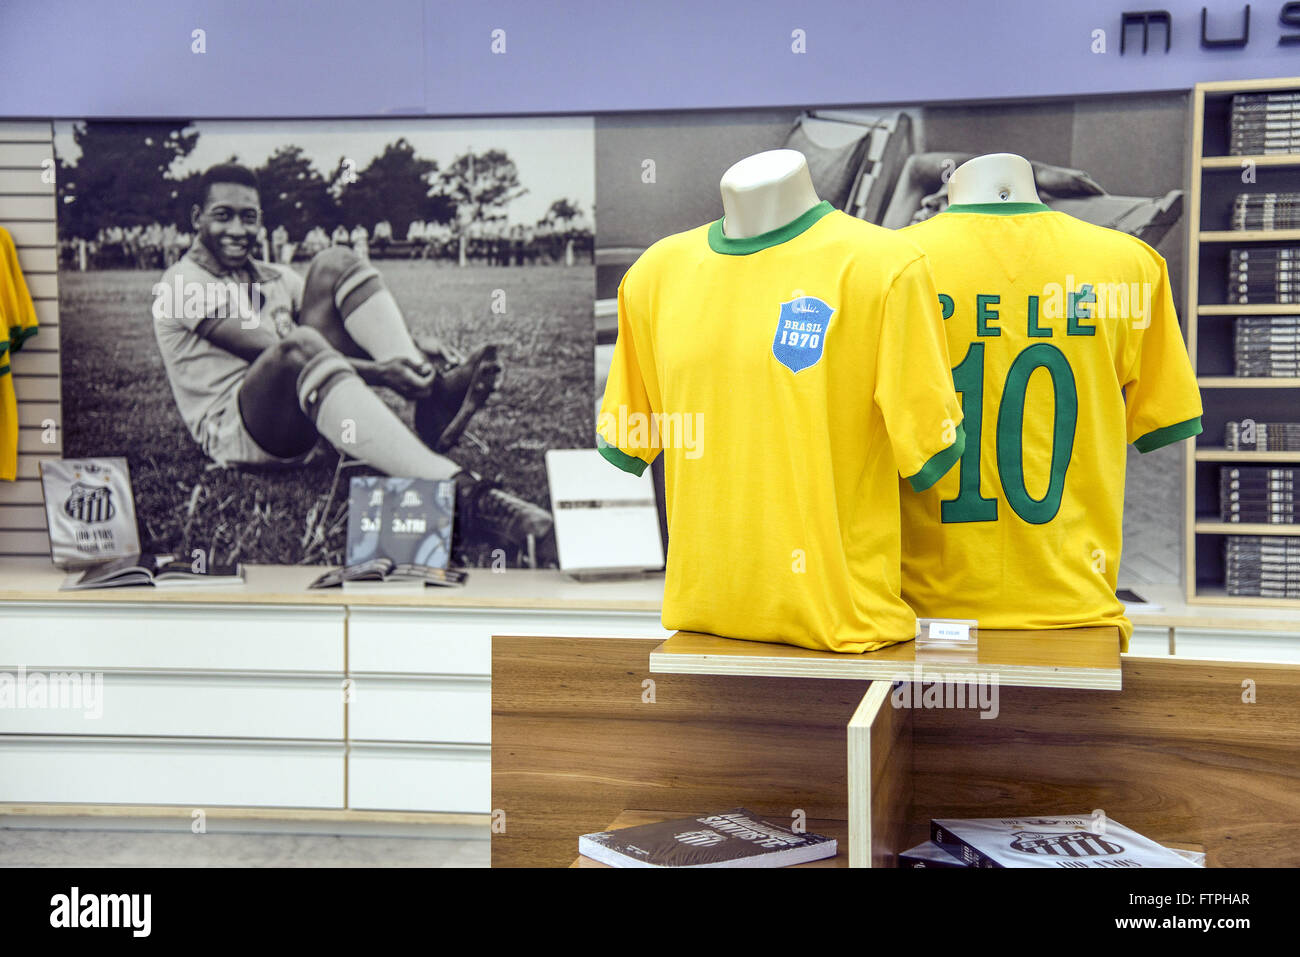 Shop with products in honor of the soccer player Pele - Interior Skin Museum Stock Photo